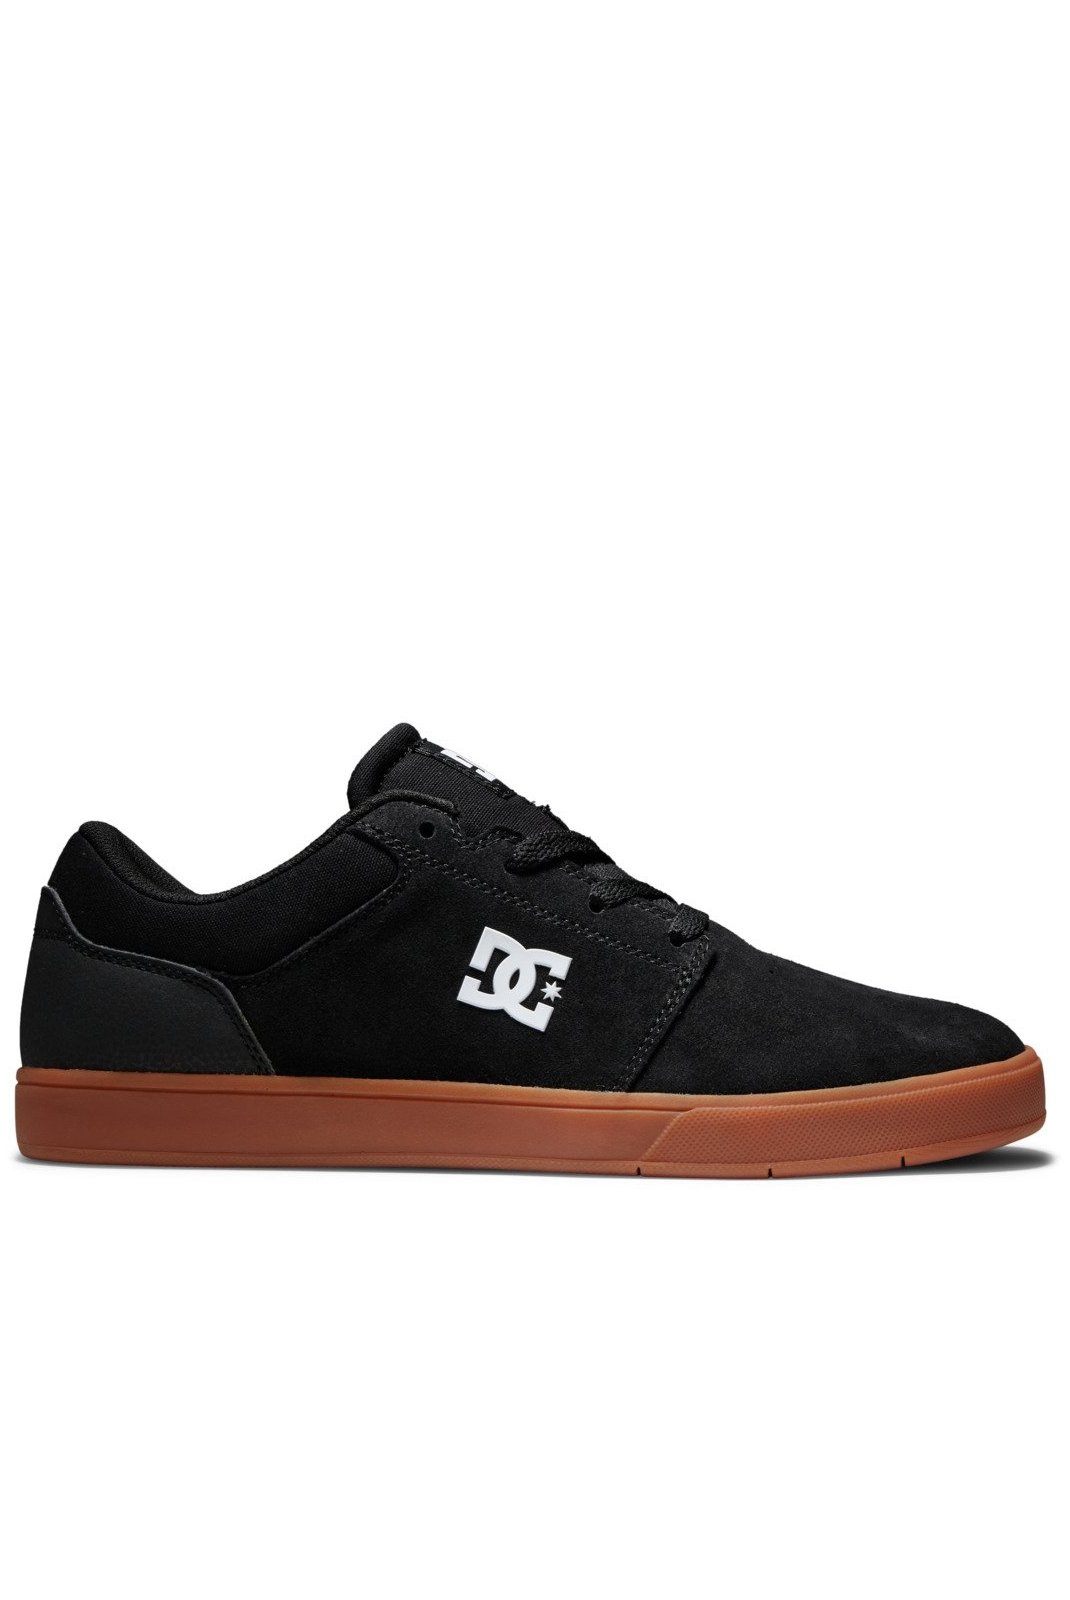 Sneakers / Sport  Dc shoes ADYS100647 BGM